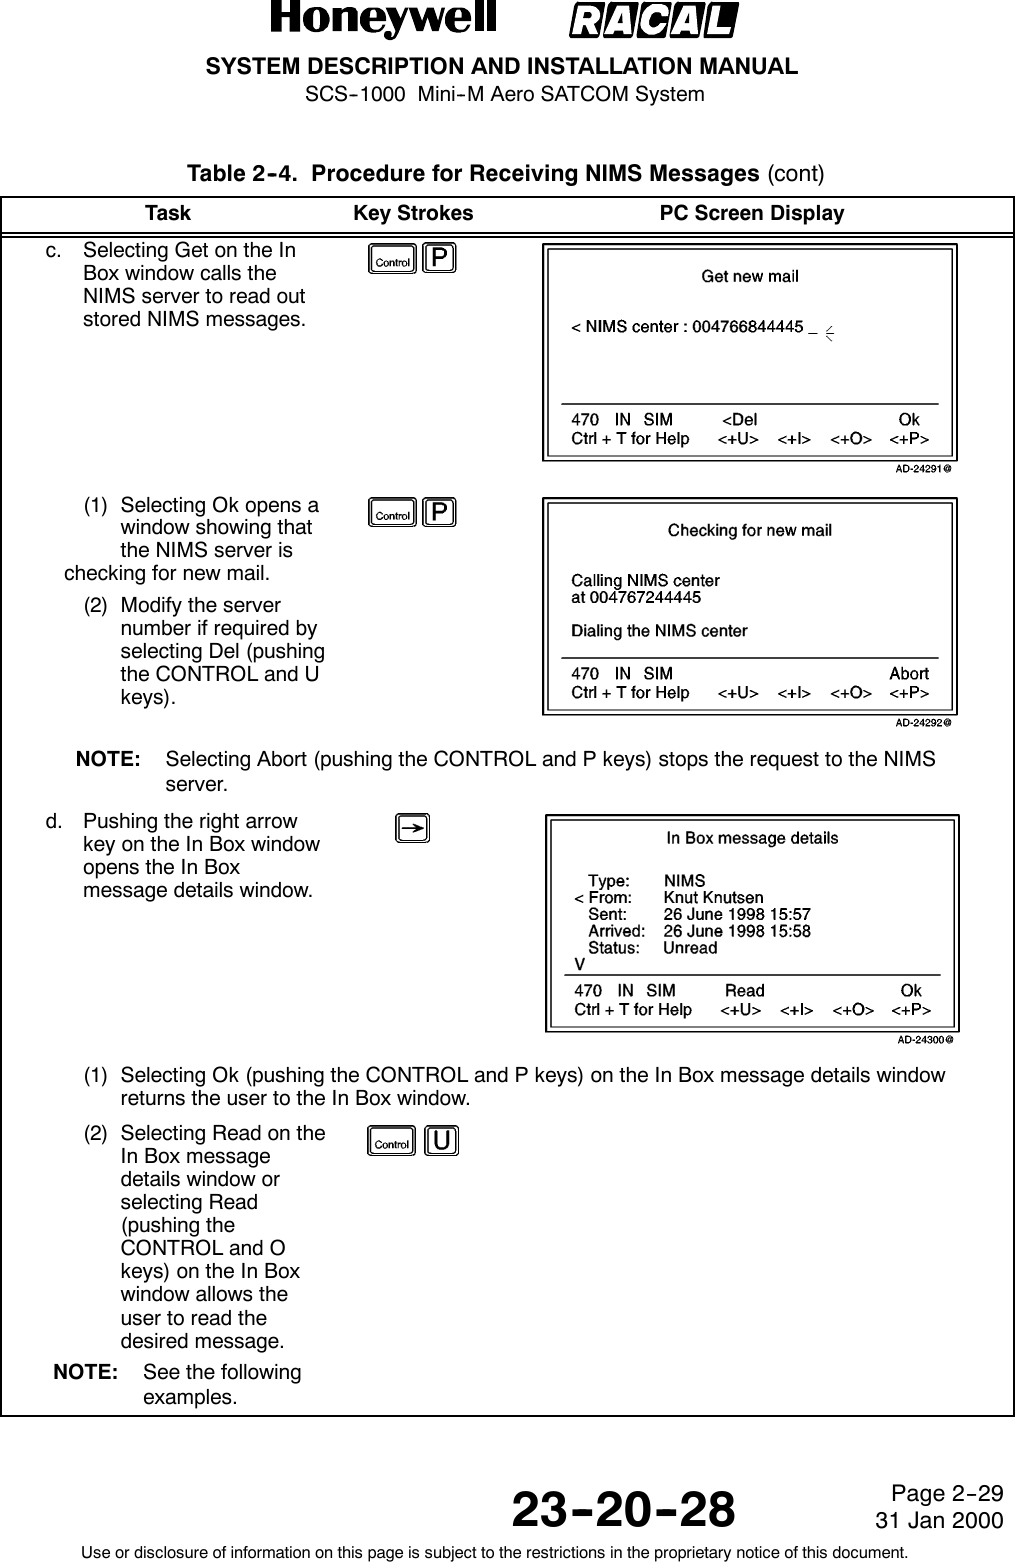 SYSTEM DESCRIPTION AND INSTALLATION MANUALSCS--1000 Mini--M Aero SATCOM System23--20--28Use or disclosure of information on this page is subject to the restrictions in the proprietary notice of this document.Page 2--2931 Jan 2000Table 2--4. Procedure for Receiving NIMS Messages (cont)Task PC Screen DisplayKey Strokesc. Selecting Get on the InBox window calls theNIMS server to read outstored NIMS messages.(1) Selecting Ok opens awindow showing thatthe NIMS server ischecking for new mail.(2) Modify the servernumber if required byselecting Del (pushingthe CONTROL and Ukeys).NOTE: Selecting Abort (pushing the CONTROL and P keys) stops the request to the NIMSserver.d. Pushing the right arrowkey on the In Box windowopens the In Boxmessage details window.(1) Selecting Ok (pushing the CONTROL and P keys) on the In Box message details windowreturns the user to the In Box window.(2) Selecting Read on theIn Box messagedetails window orselecting Read(pushing theCONTROL and Okeys) on the In Boxwindow allows theuser to read thedesired message.NOTE: See the followingexamples.